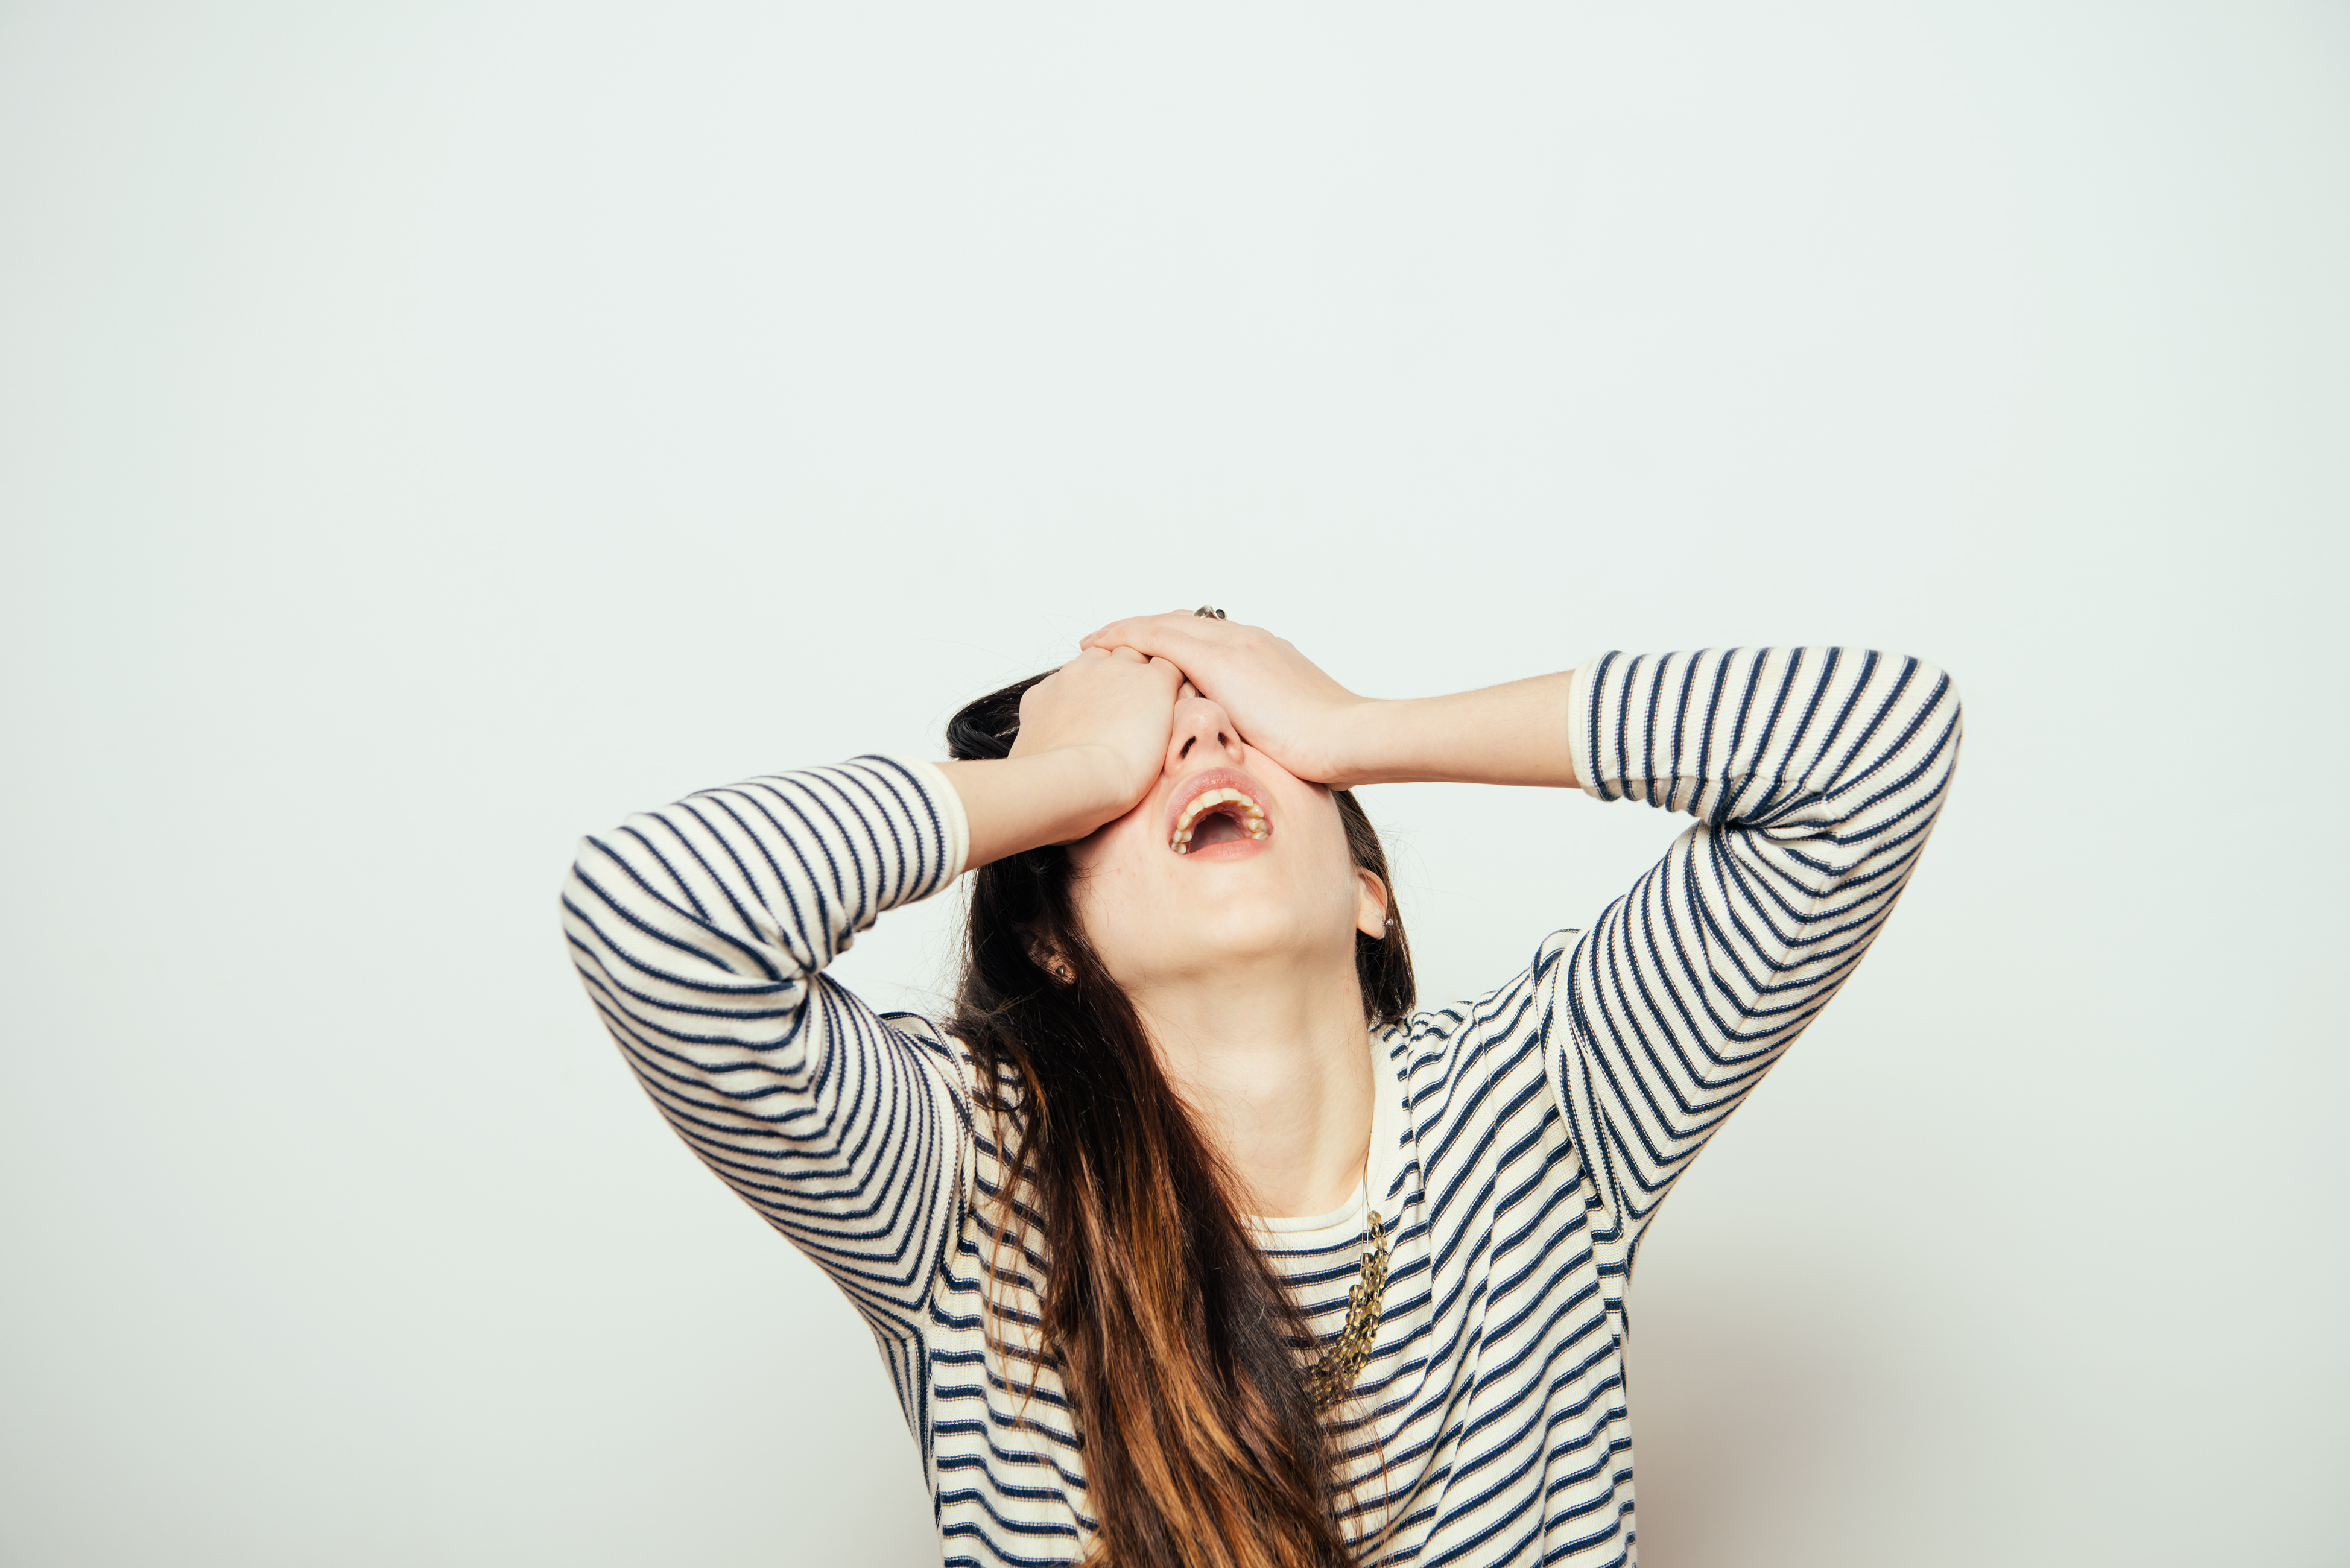 Exasperated woman holding her eyes closed | Source: Shutterstock